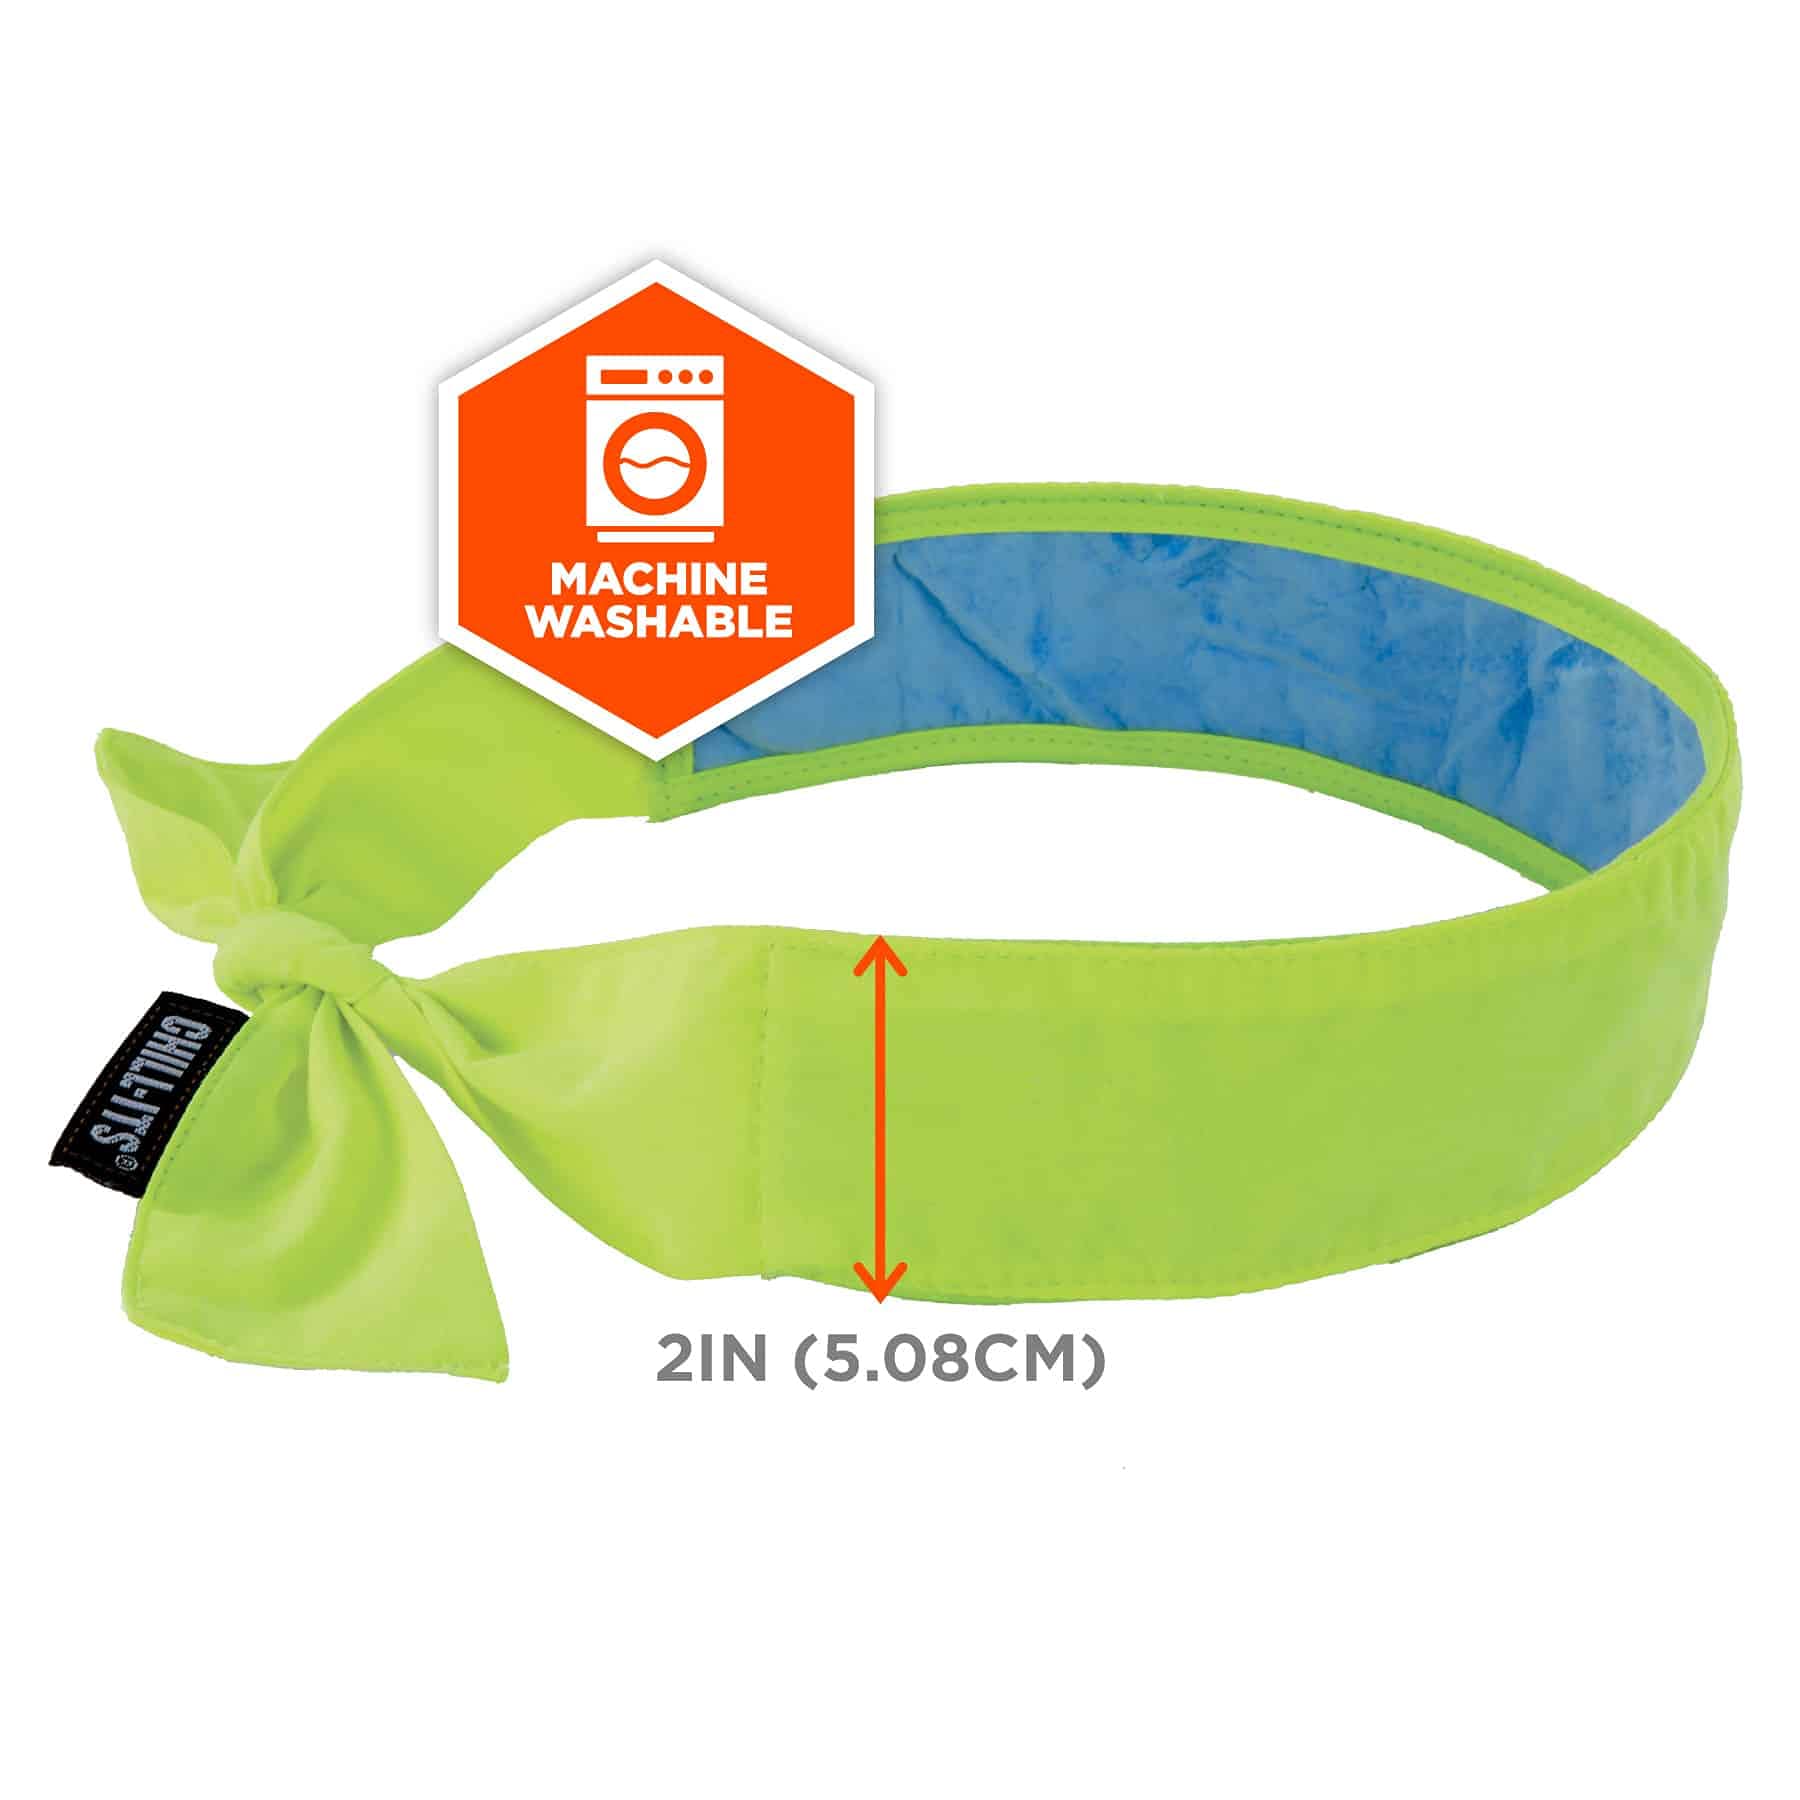 Ergodyne Chill Its 6700CT Cooling Bandana, Lined with Evaporative PVA Material for Fast Cooling Relief, Tie Closure